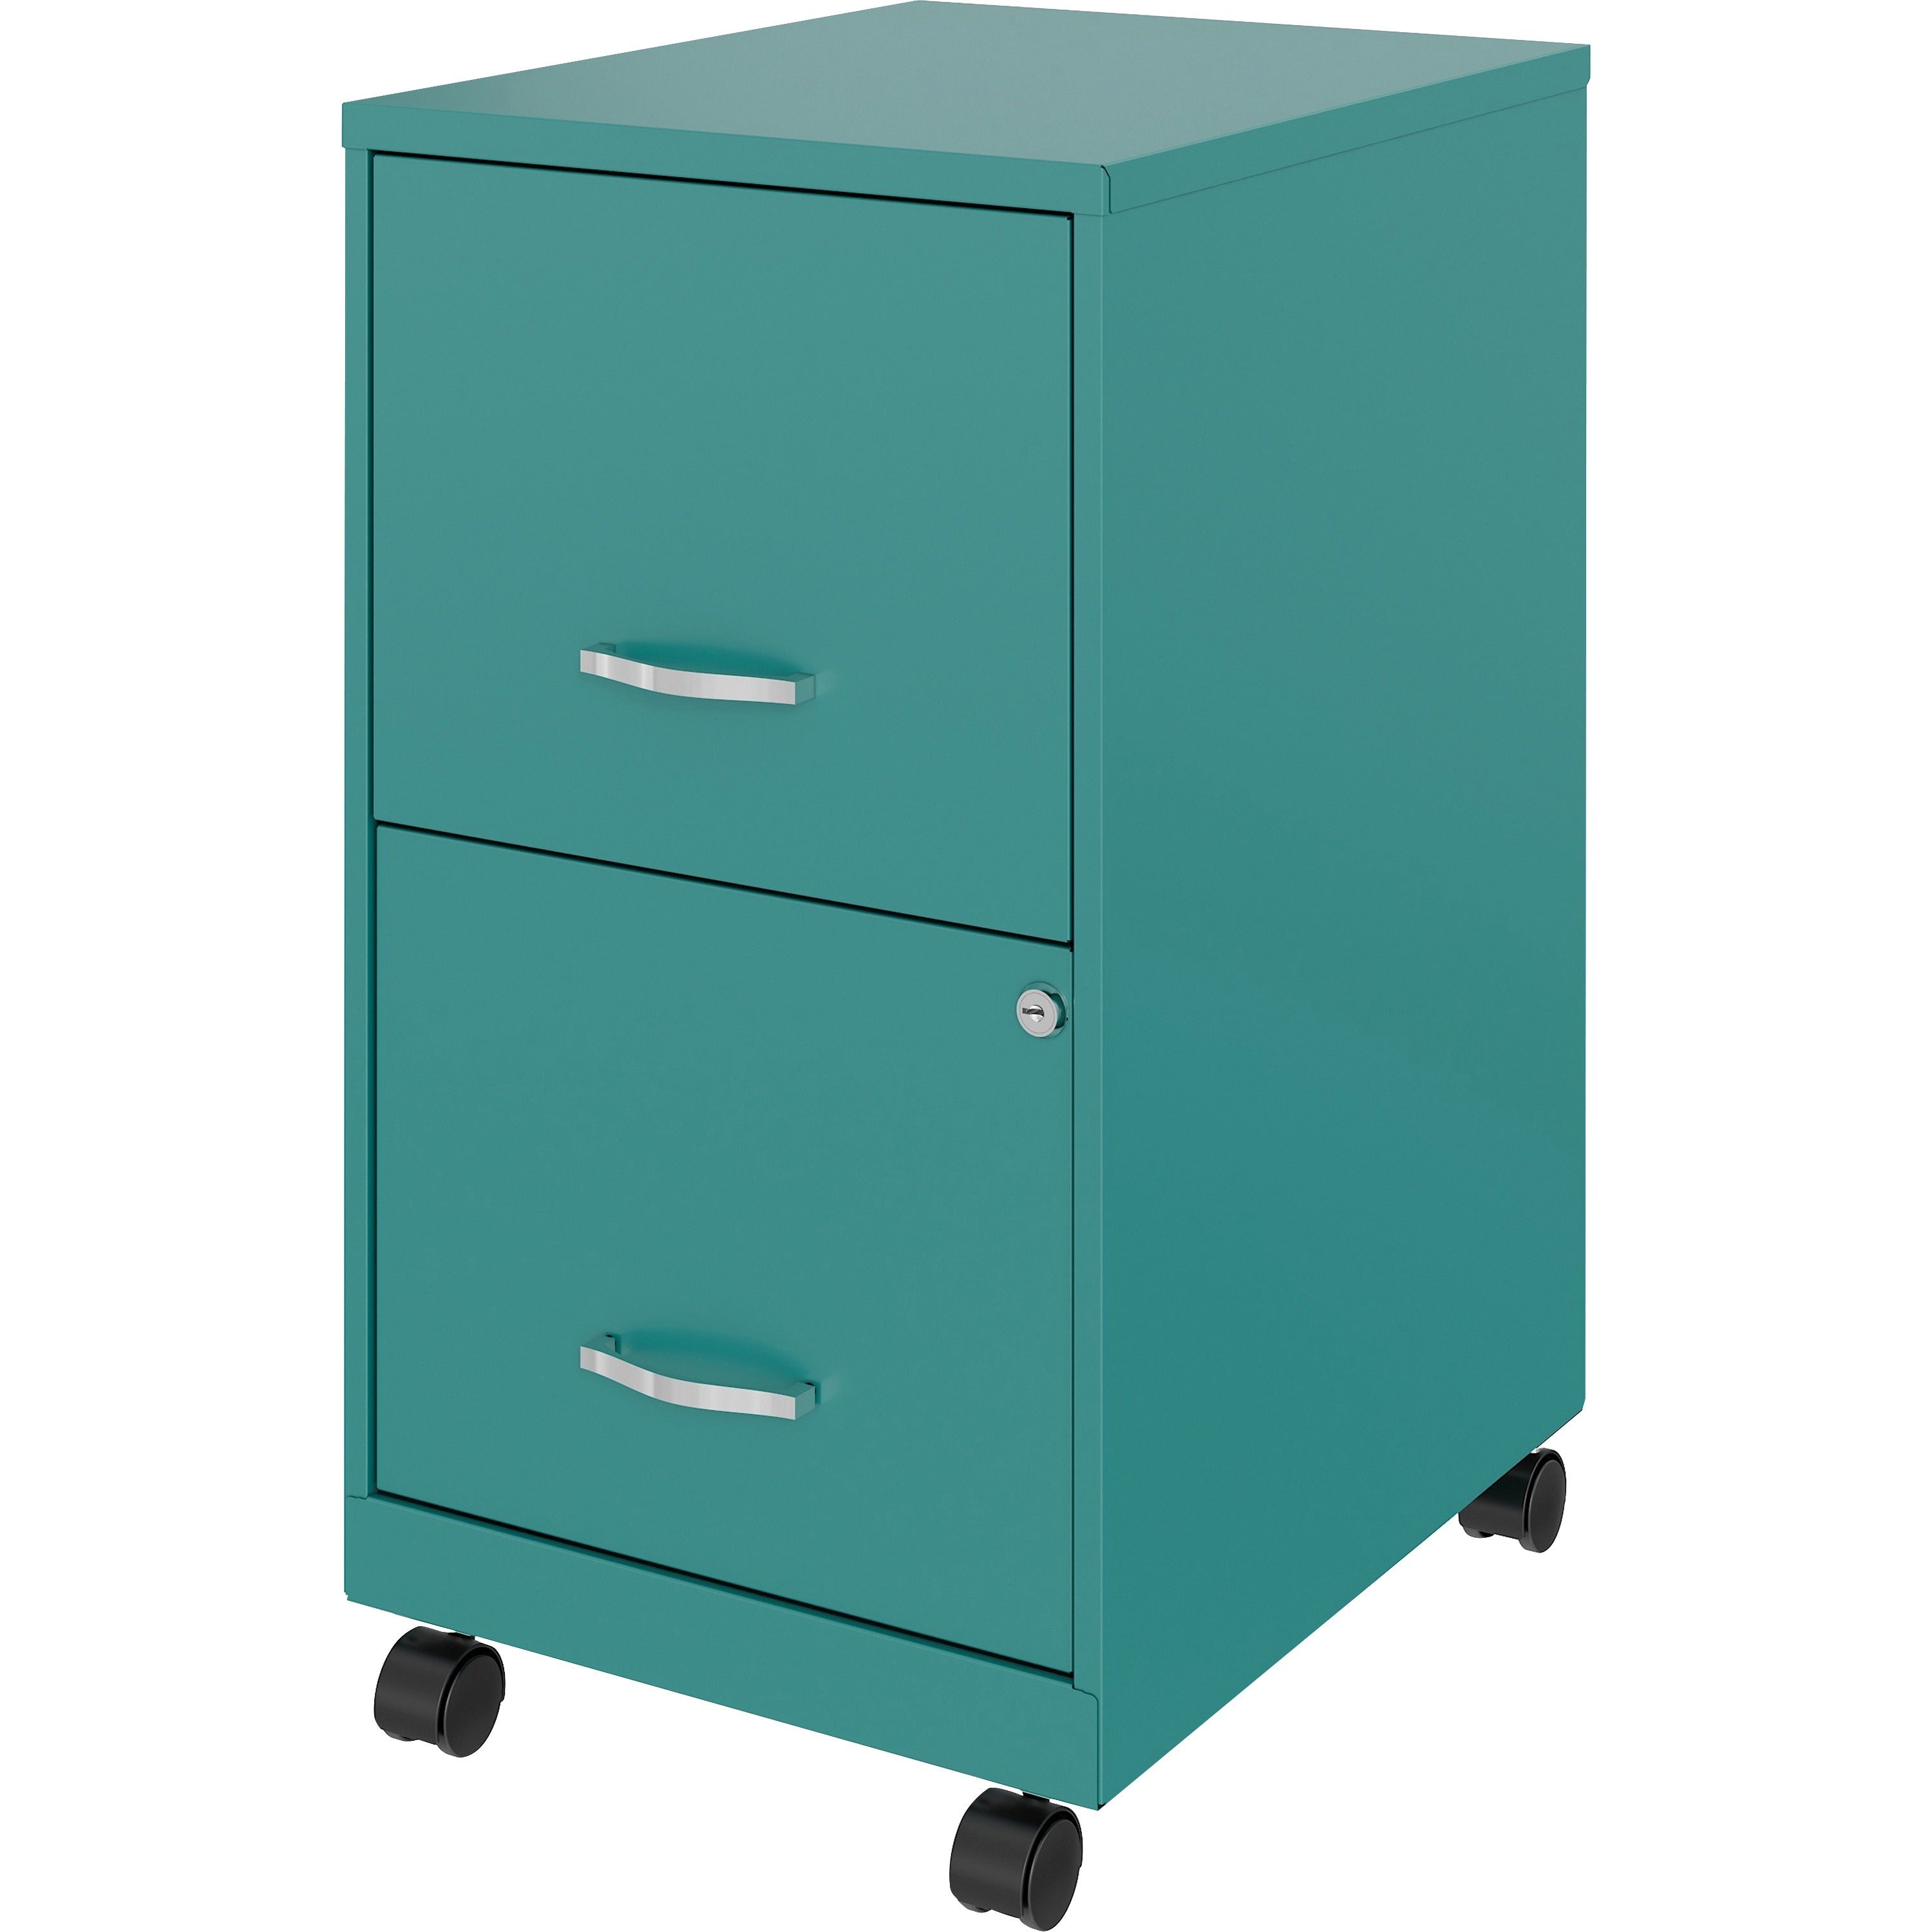 nusparc-mobile-file-cabinet-142-x-18-x-265-for-file-letter-mobility-locking-drawer-glide-suspension-3-4-drawer-extension-cam-lock-nonporous-surface-teal-painted-steel-steel-recycled_nprvf218amtl - 3